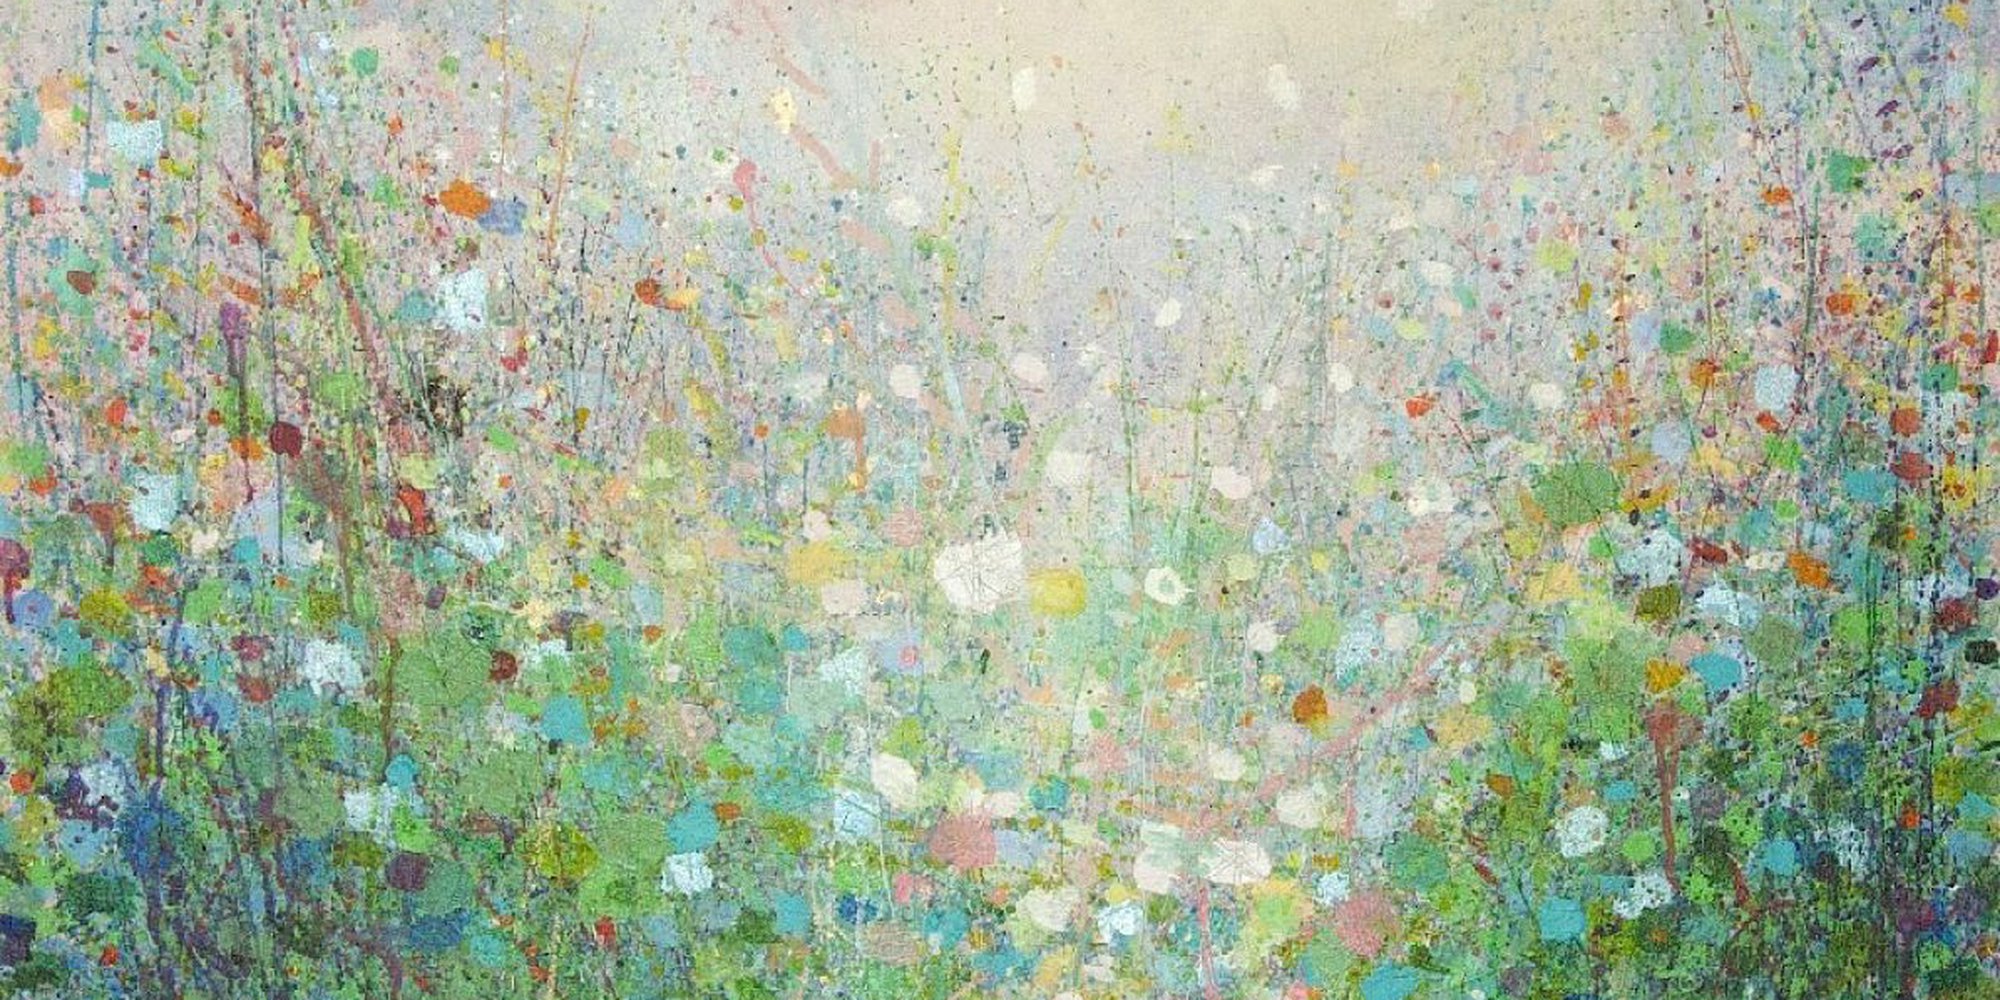 Art of the Day: "Sandy Dooley, Spring Idyll, 2013" by Sandy Dooley